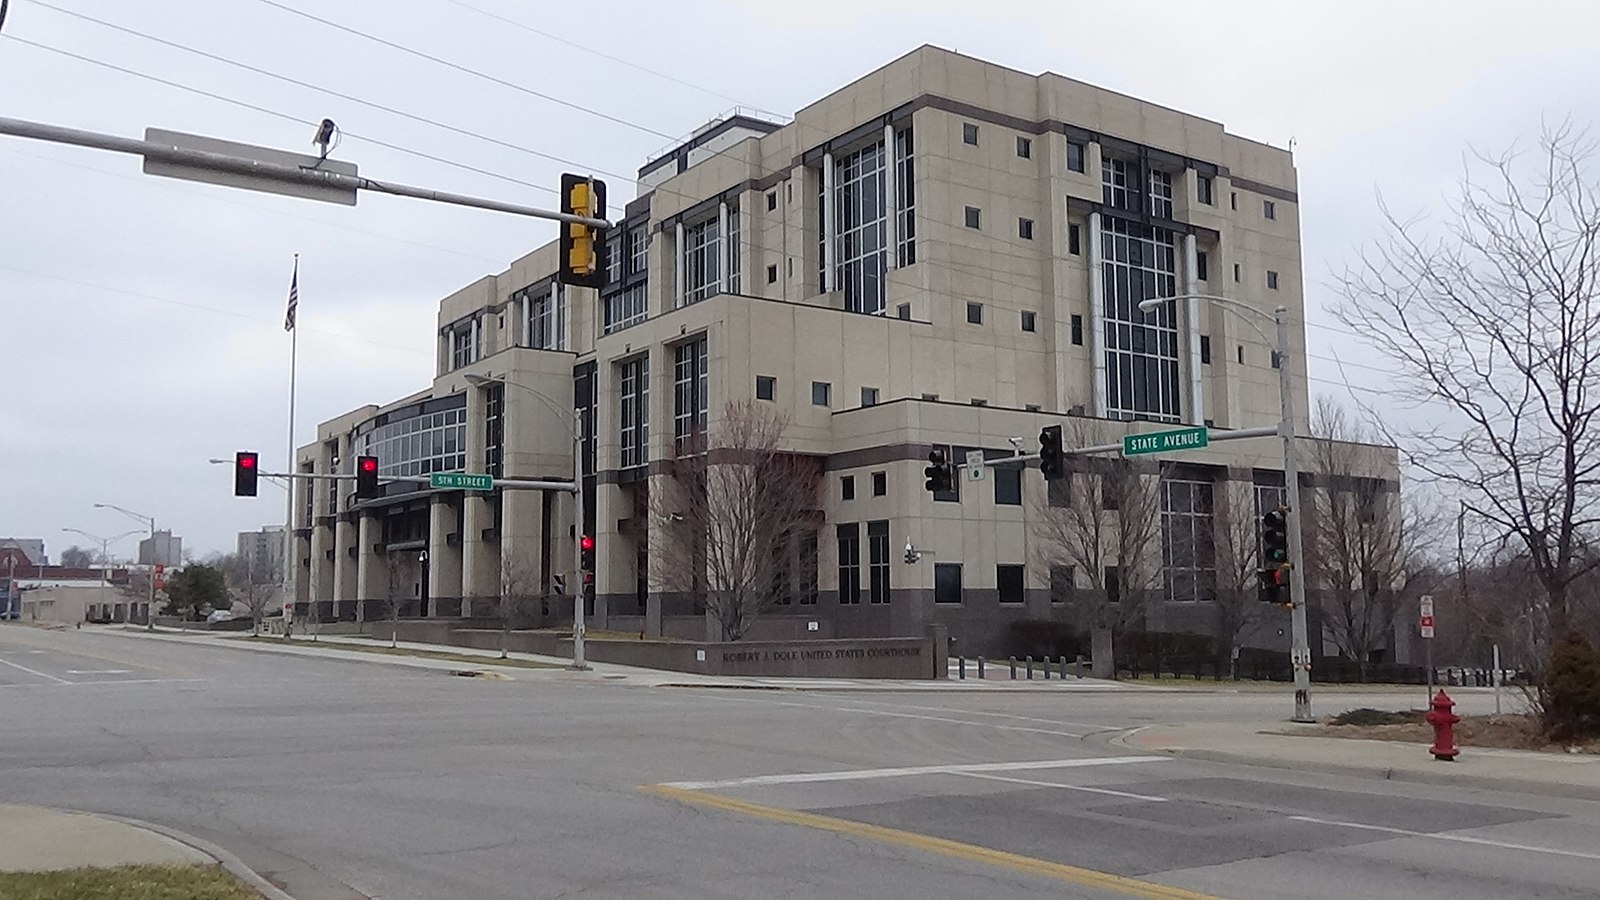 The Robert J Dole Courthouse in Kansas City, MI where a federal court judge declined to dismiss the charges against Dr. Tao.